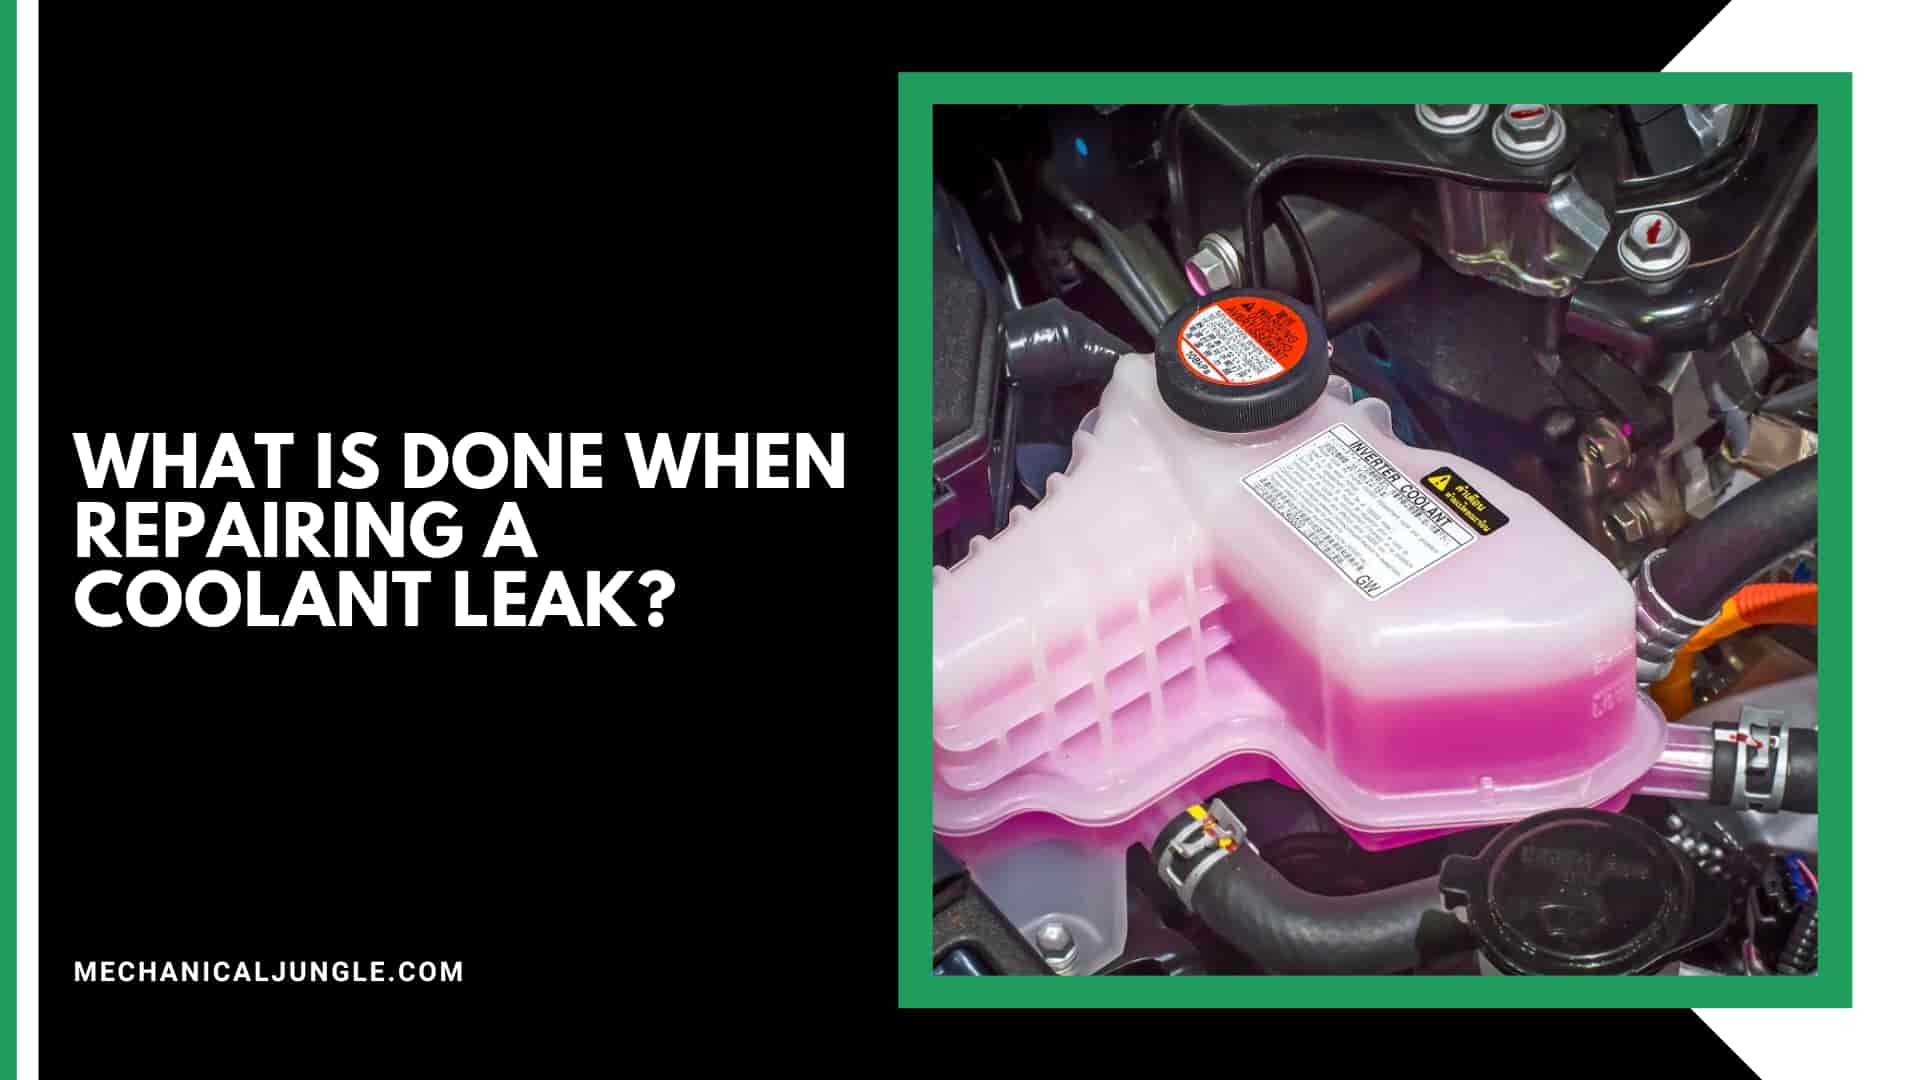 What Is Done When Repairing a Coolant Leak?